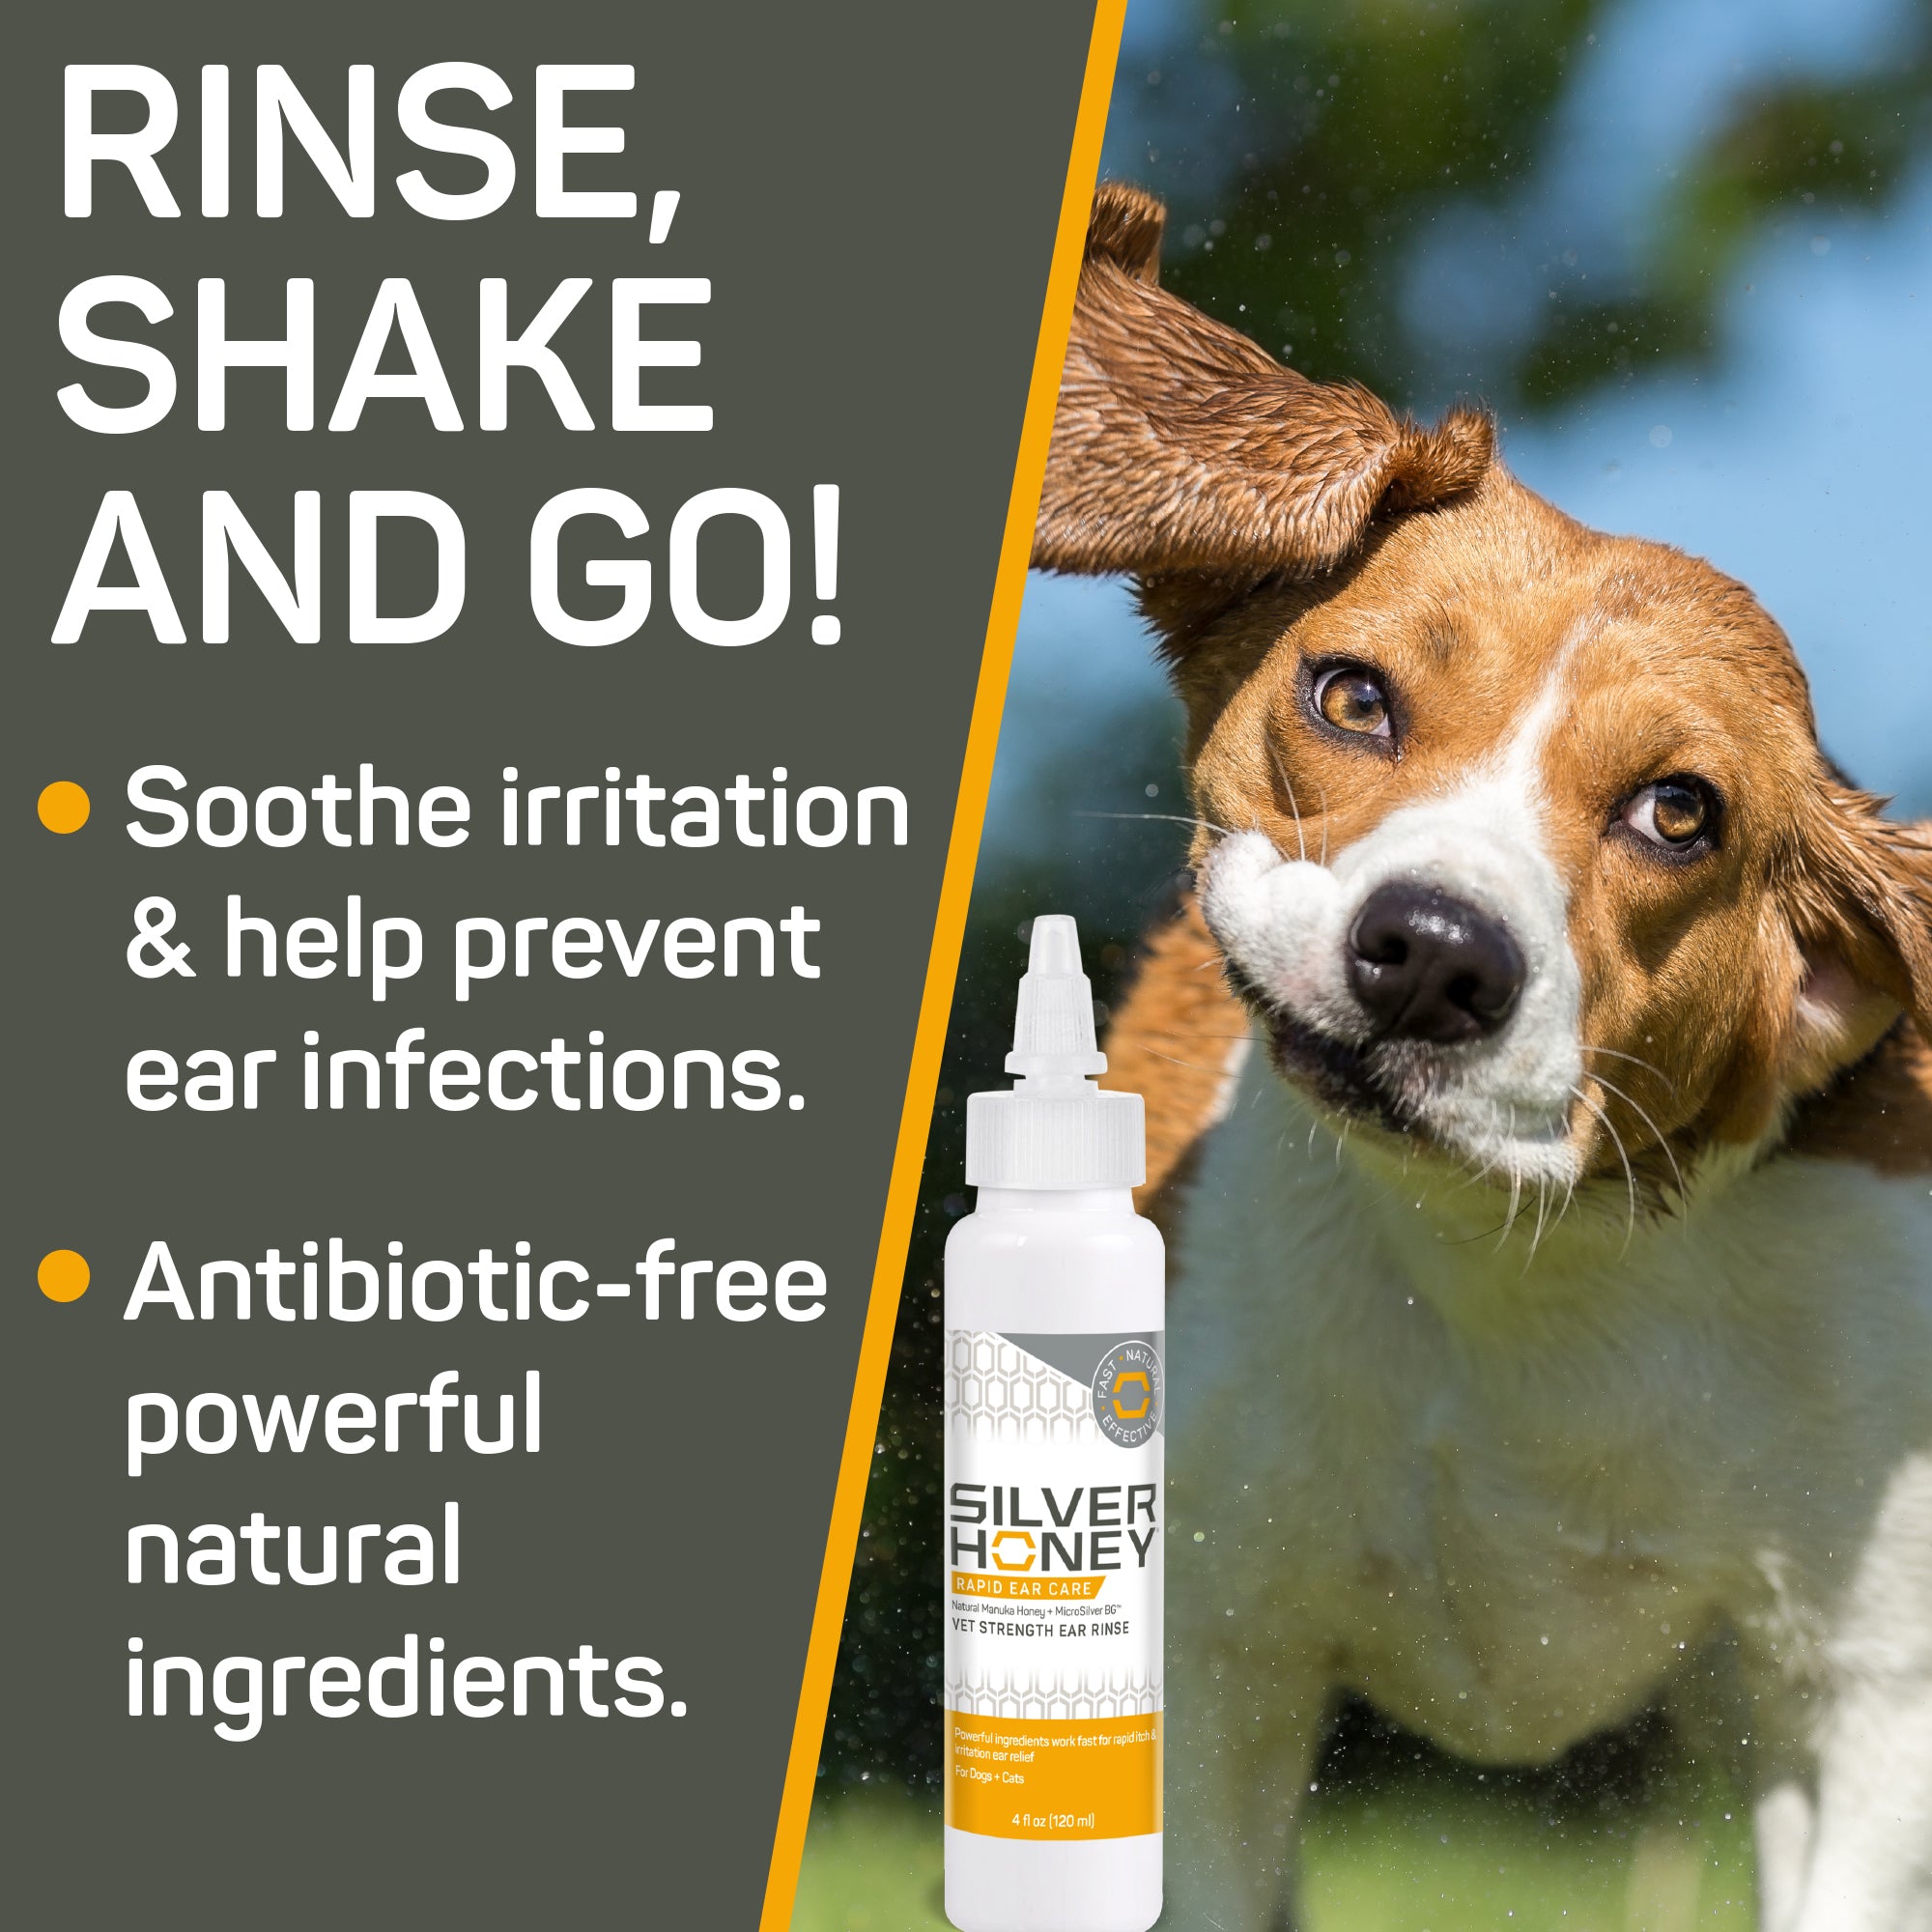 Rinse, Shake and go! Beagle shaking his head after application of Silver Honey Ear Rinse. Soothe irritation & help prevent ear infections. Antibiotic-free powerful natural ingredients.